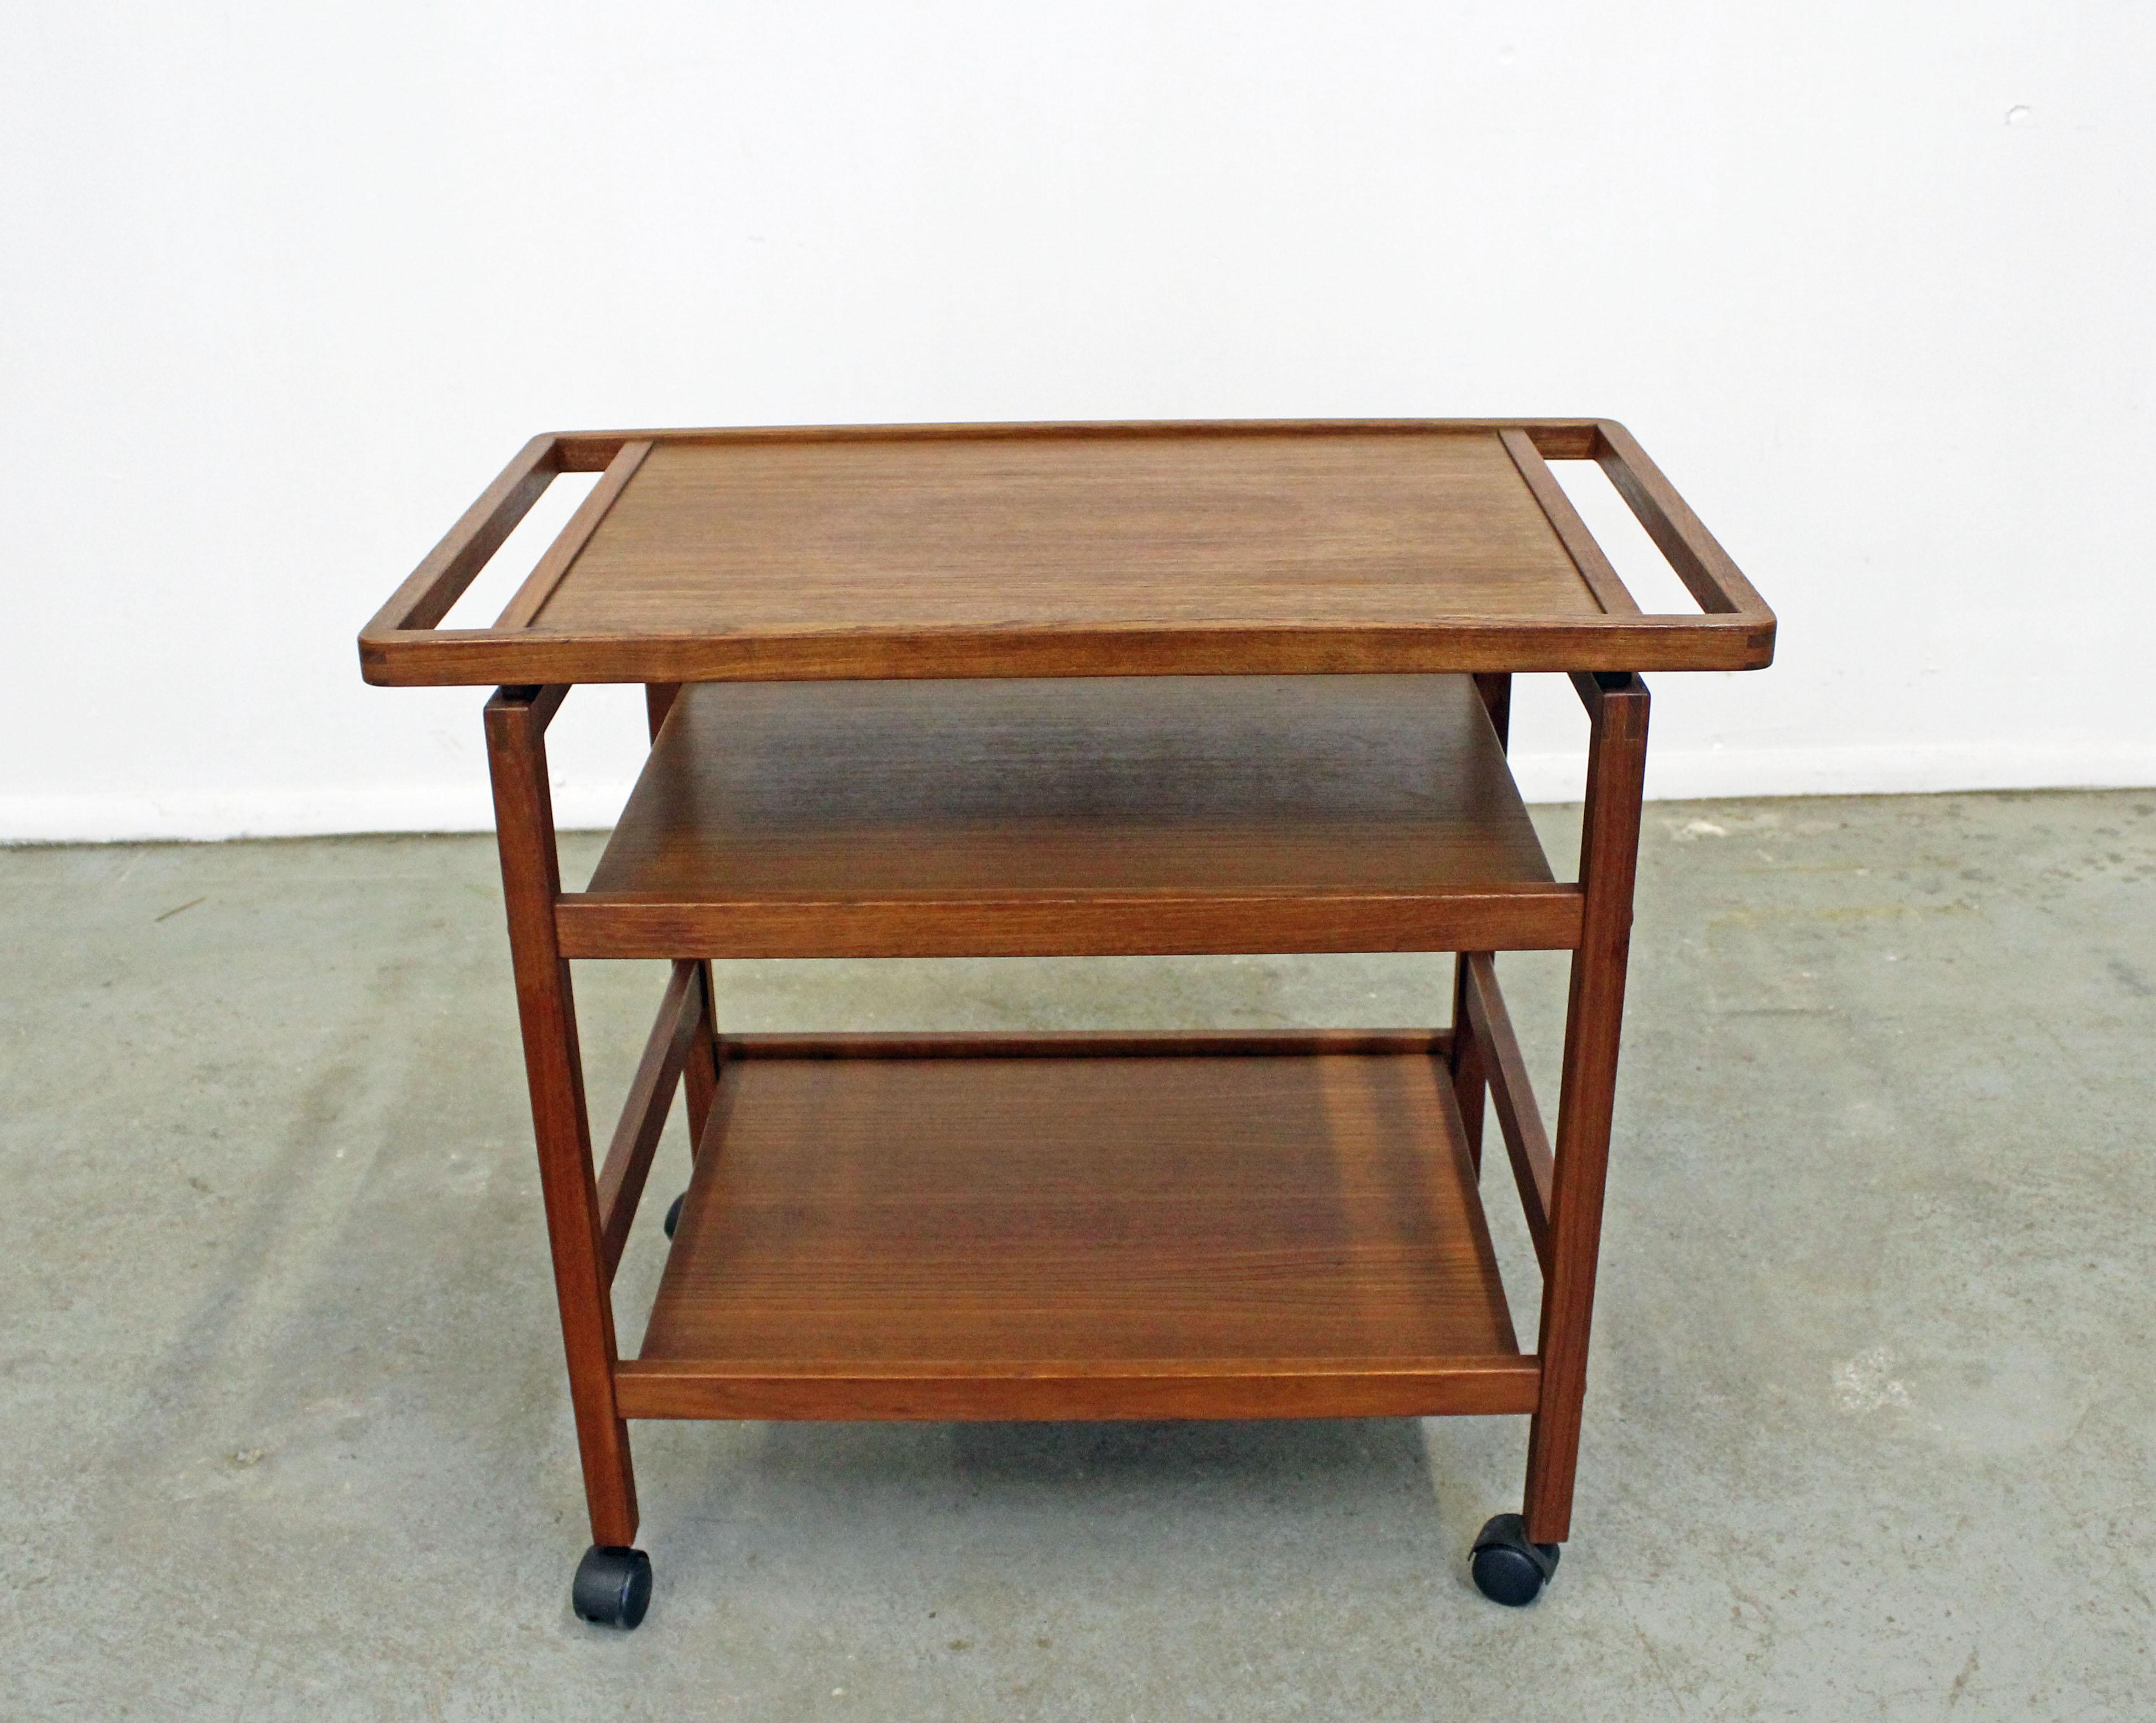 What a find. Offered is a Danish Modern teak serving cart on black castor wheels with a removable top. Great for storage, serving drinks, or food. It is in excellent condition, showing minor age wear (minor surface wear/scratches, age wear--see